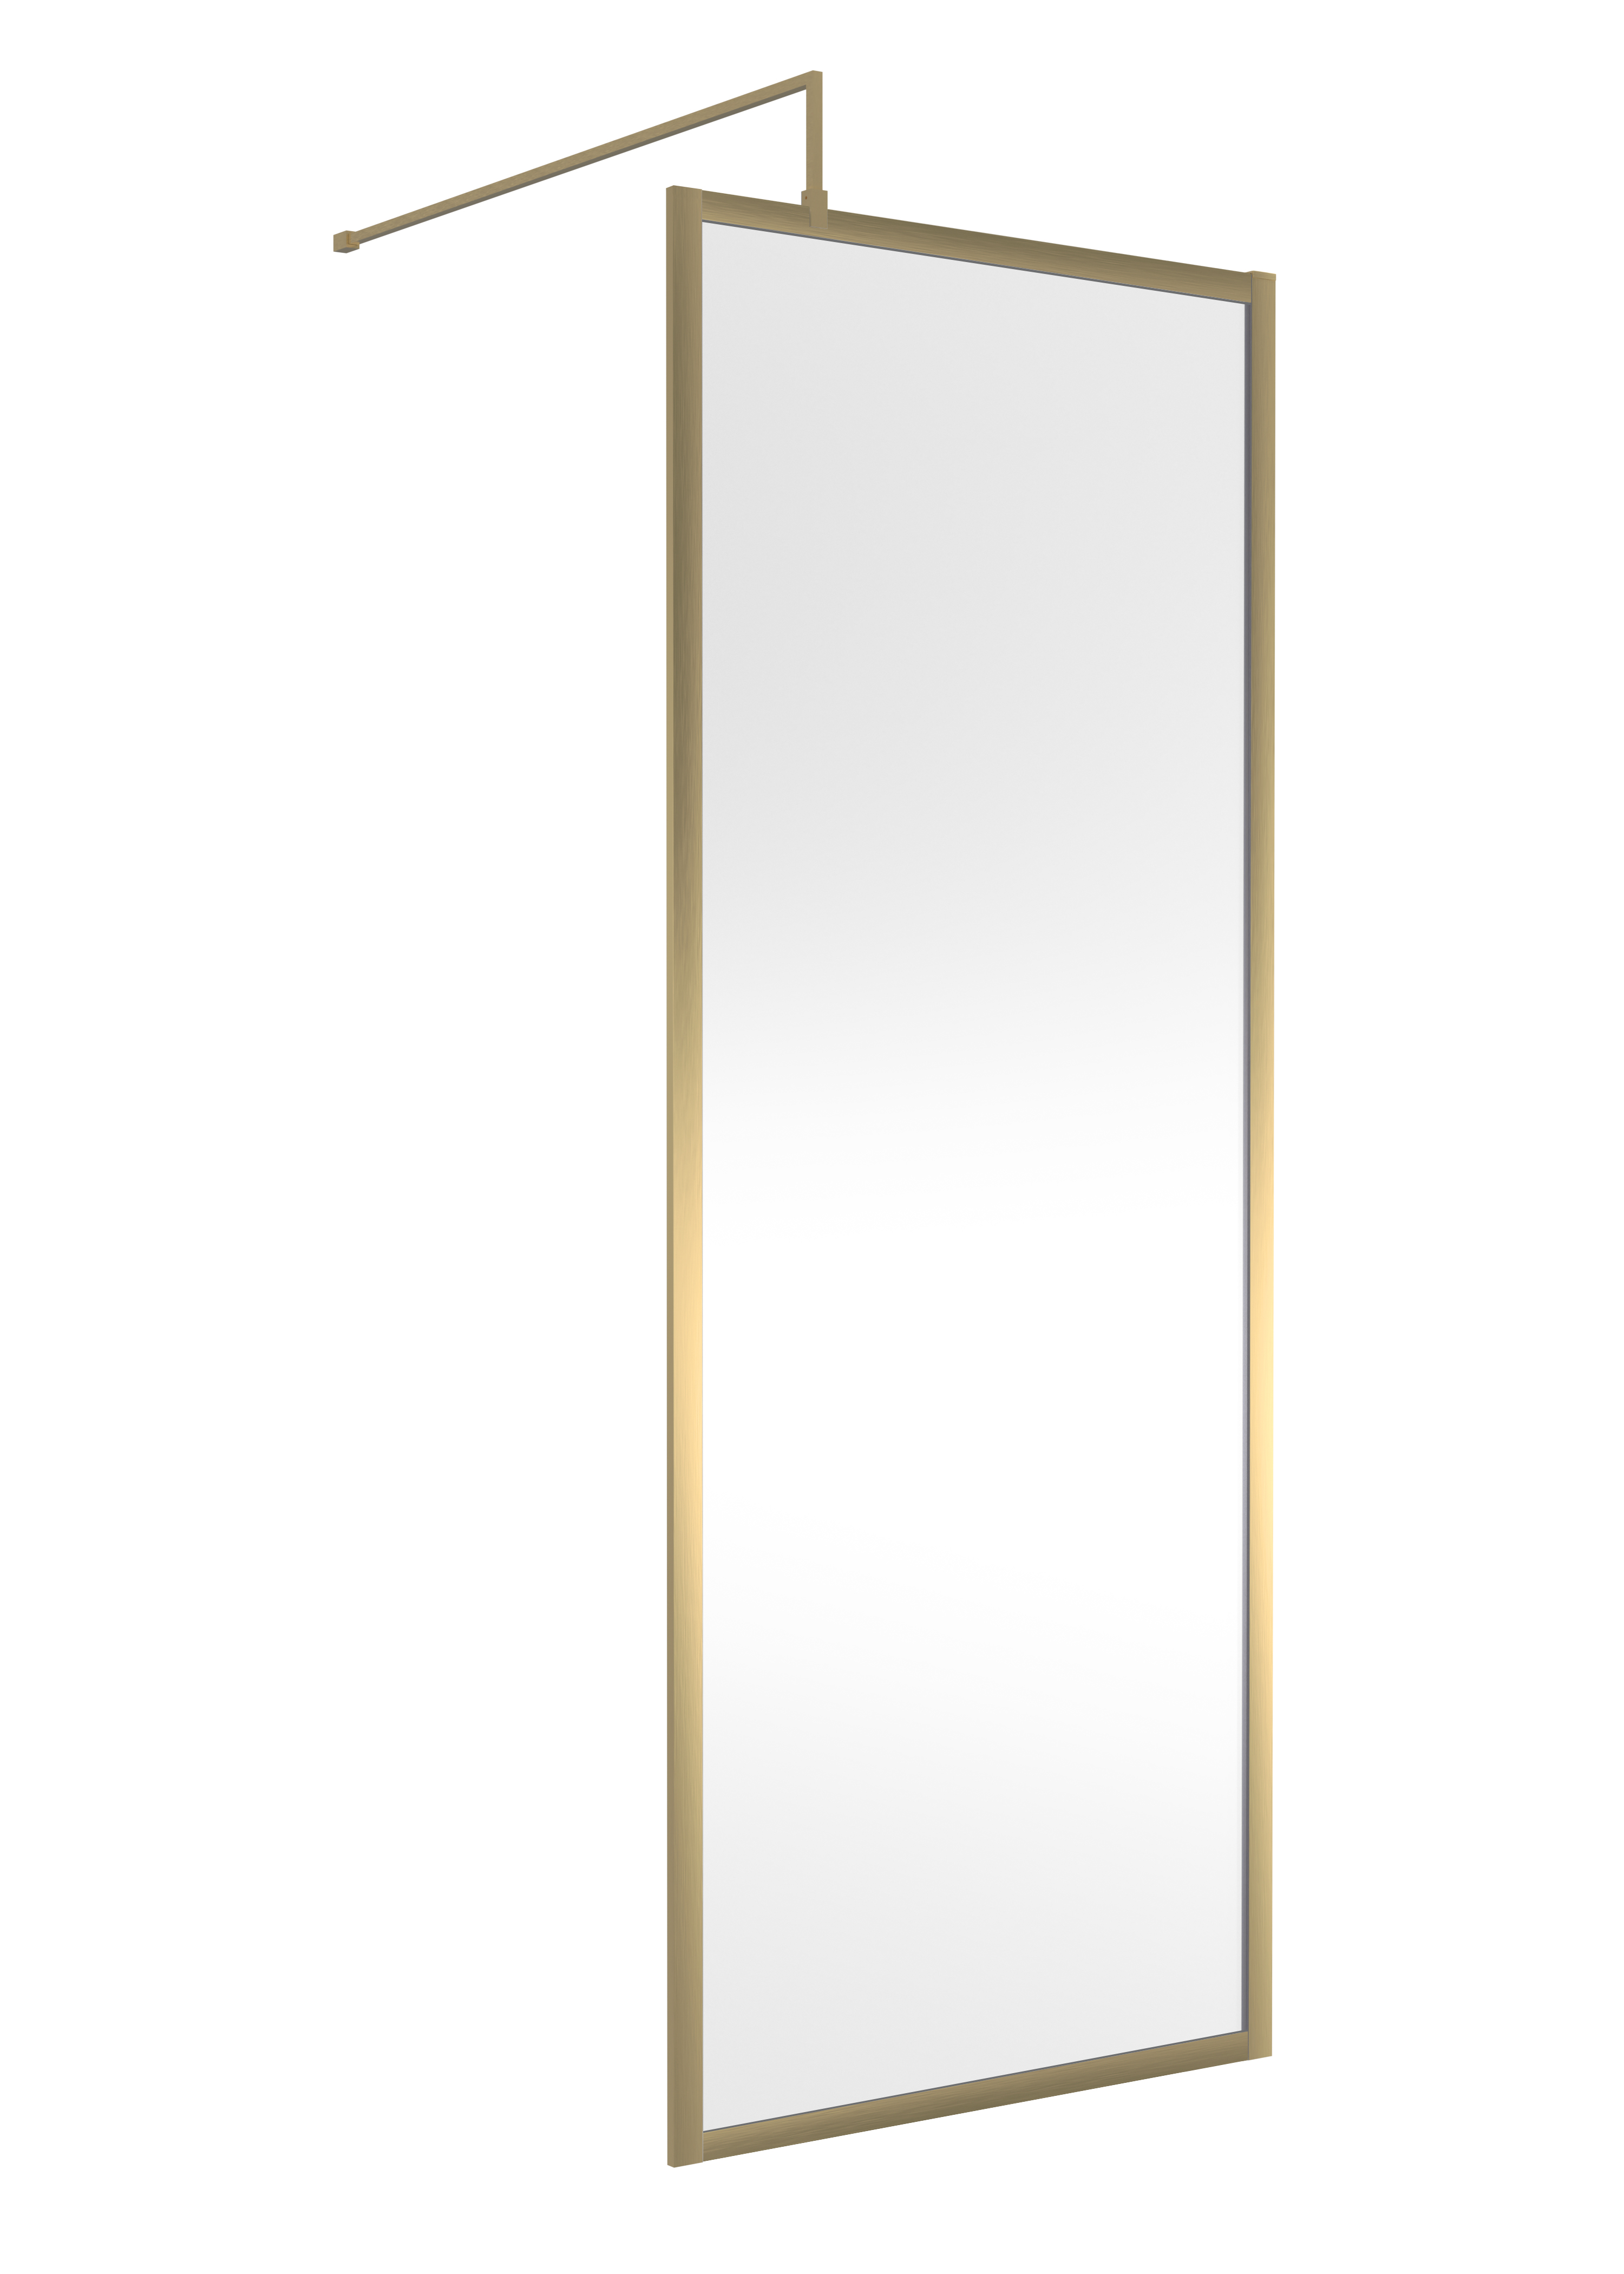 Hudson Reed Full Outer Frame Wetroom Screen 1950x800x8mm - Brushed Brass (18937)